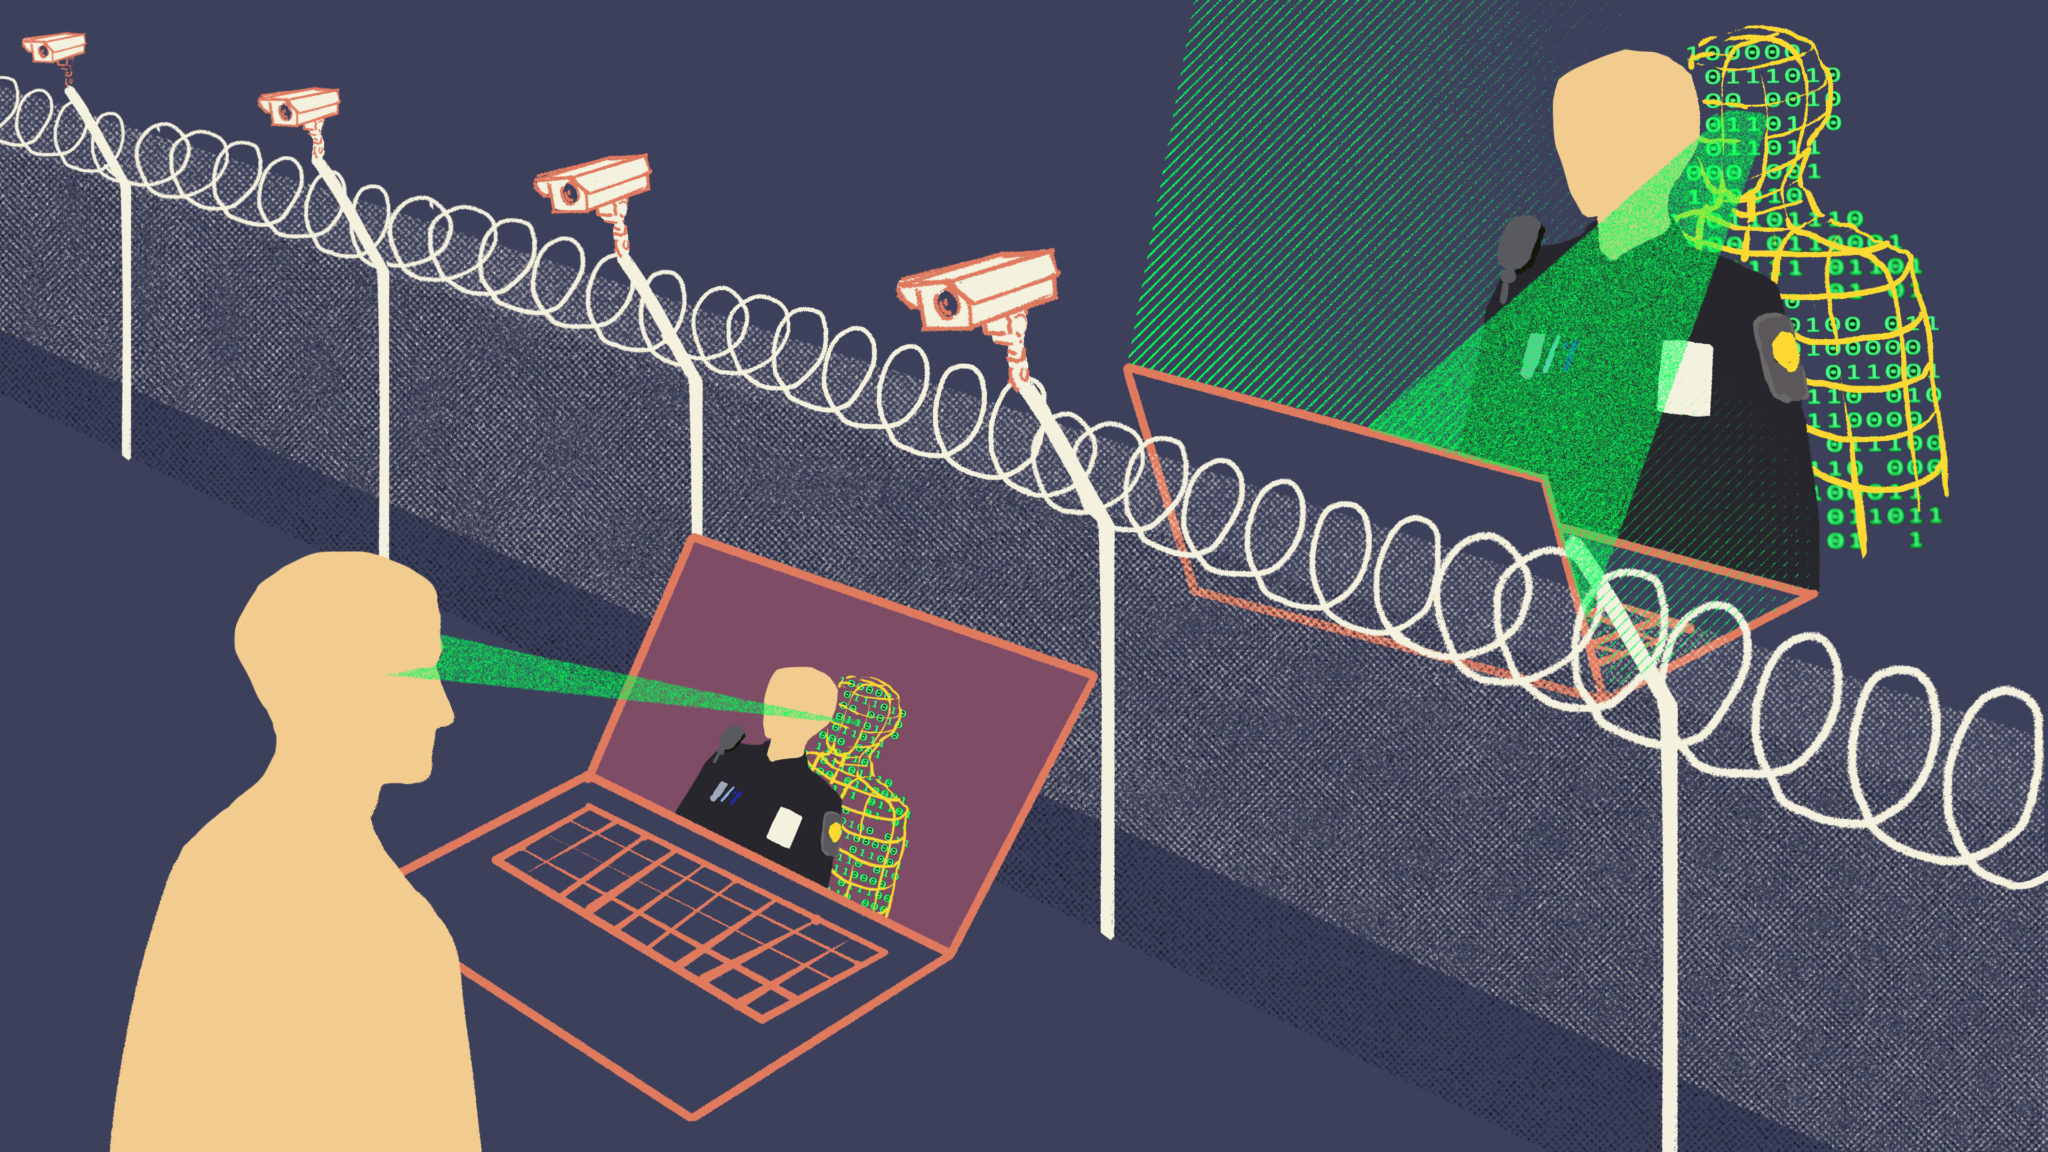 Illustration of A person using a laptop gazed by border guard using artificial intelligence companion depicted as human shape of binary code. Barbed wire fences with surveillance cameras separate the scene, emphasising privacy intrusion by border guard and monitoring of individuals wanting to cross the border.